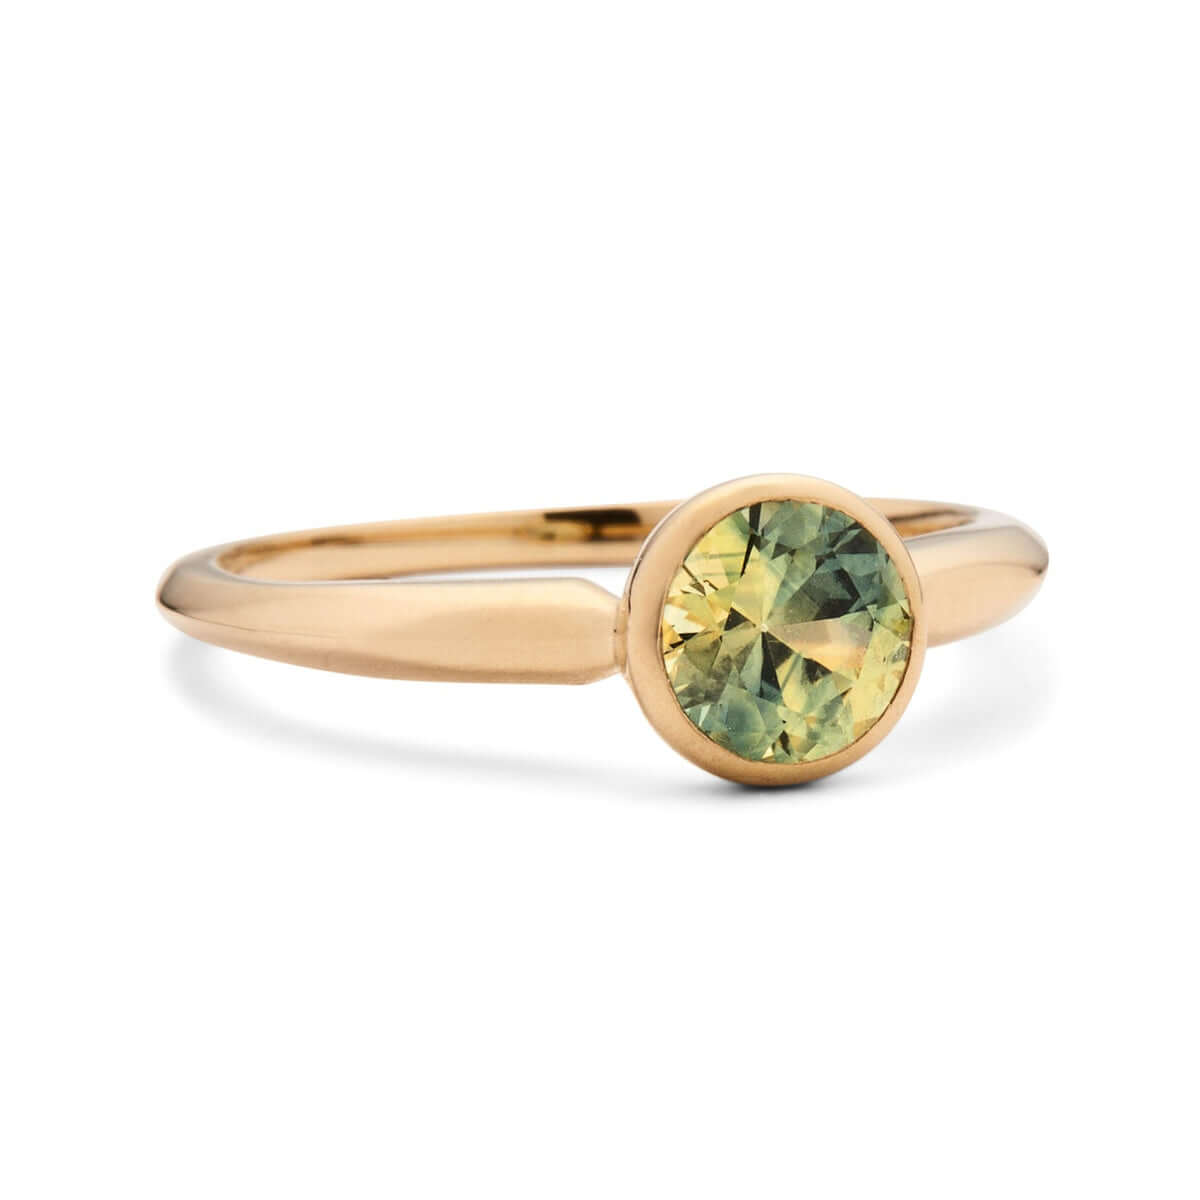 A side-angled view of a simple yet elegant gold ring with a bezel setting, showcasing a round-cut Australian sapphire with a soft greenish hue, on a white backdrop.